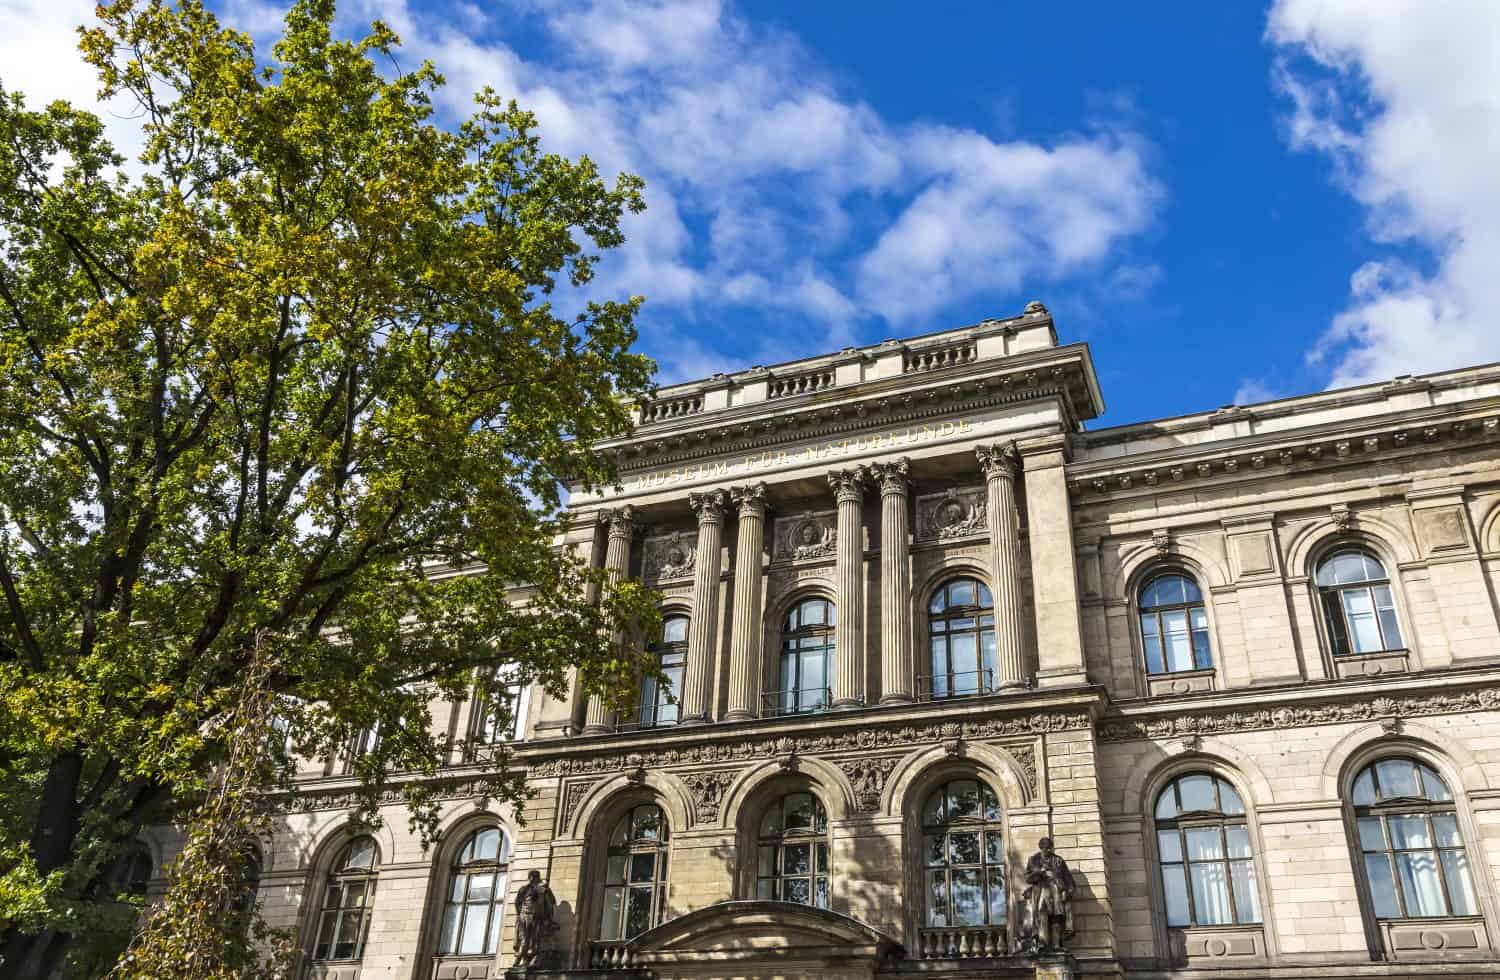 Facade of Berlin Museum of Natural History (Museum fur Naturkunde). Established in 1810, houses more millions zoological, paleontological and mineralogical specimens